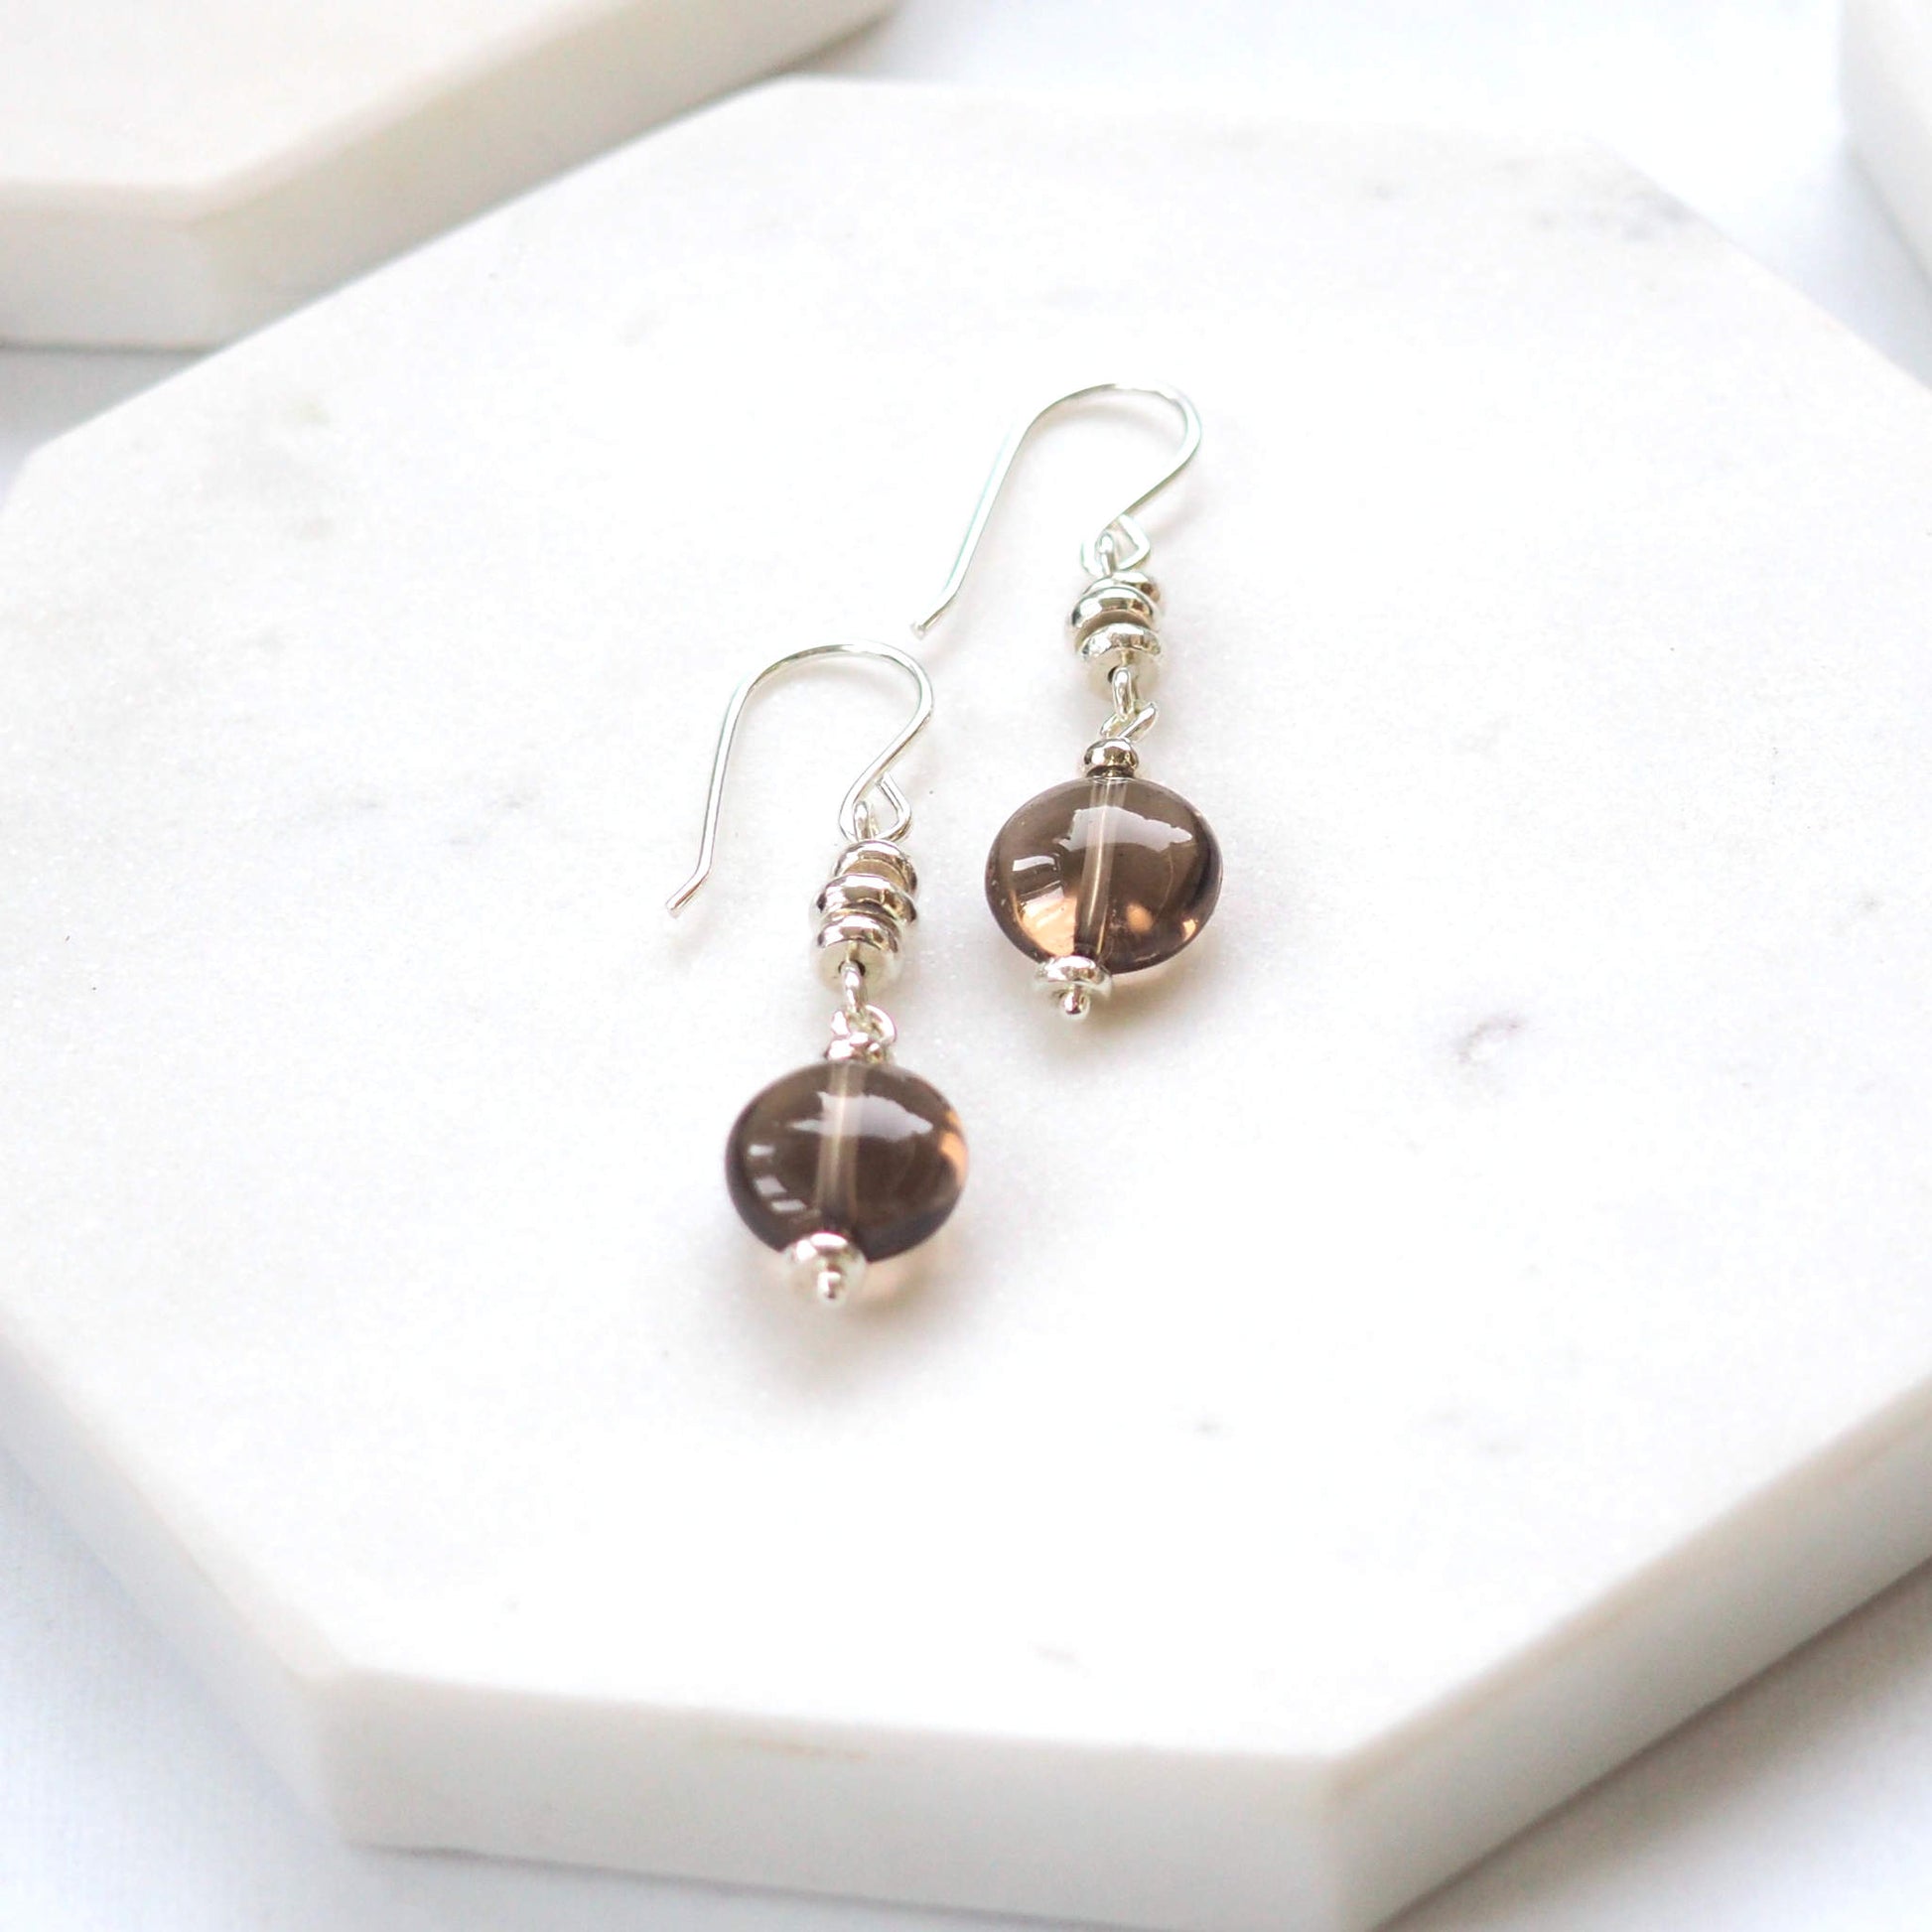 Smoky Quartz and Sterling Silver dropper earrings. made from recycled silver beads and a 1cm round smoky quartz drop. Made in Scotland by maram jewellery